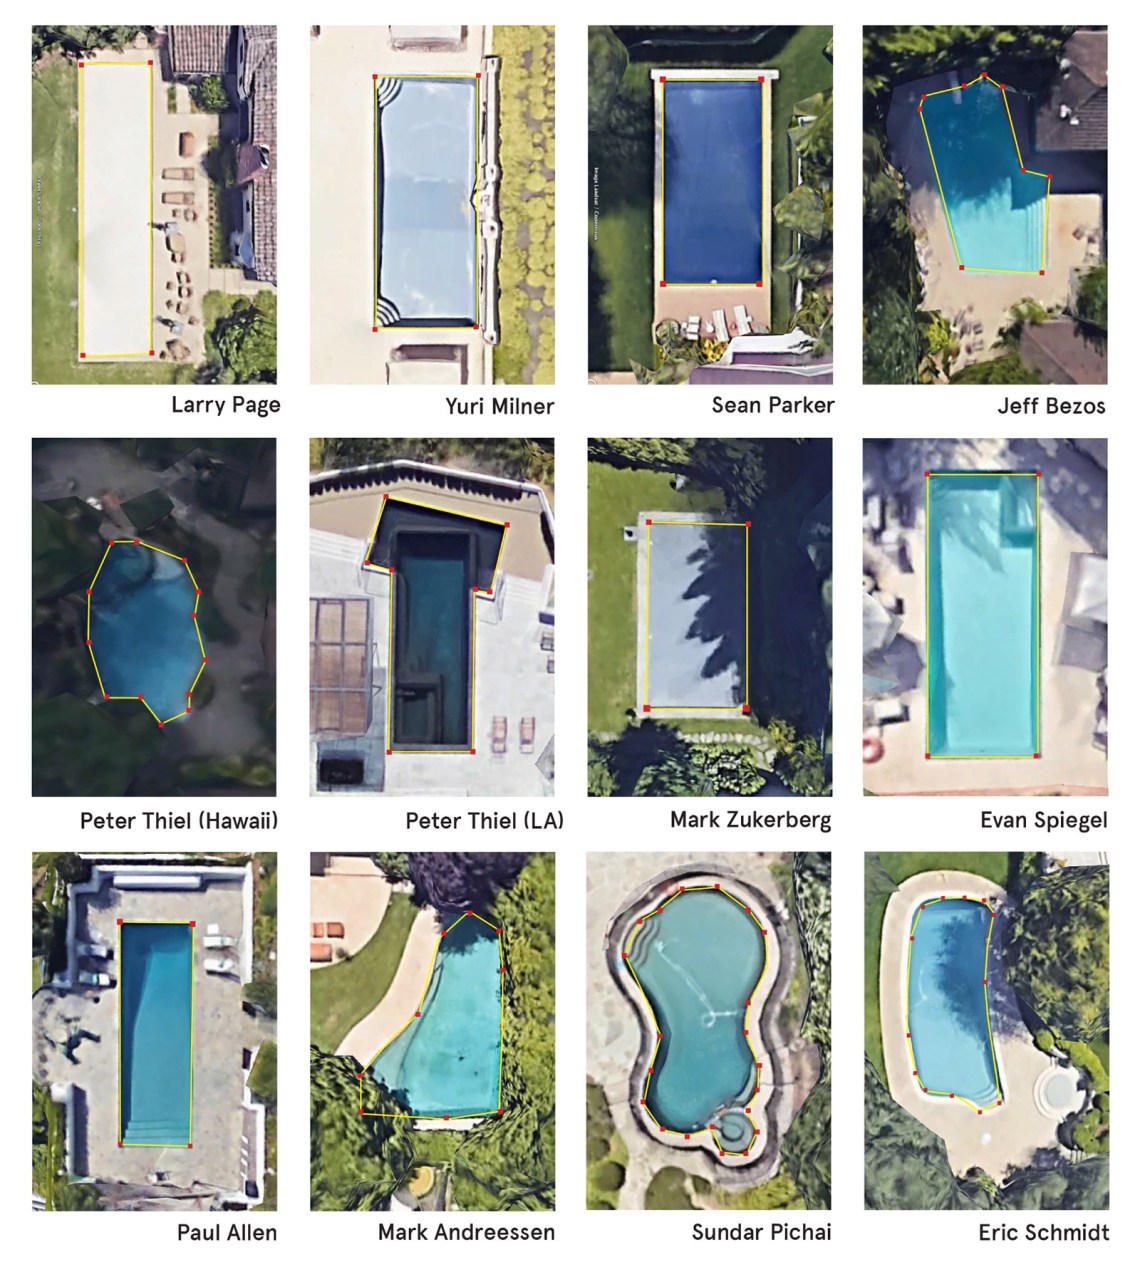 ‘Data Pools’; a geolocation spoofing project by Adam Harvey and Anastasia Kubrak that virtually relocated people’s phones to the pools of Silicon Valley CEOs